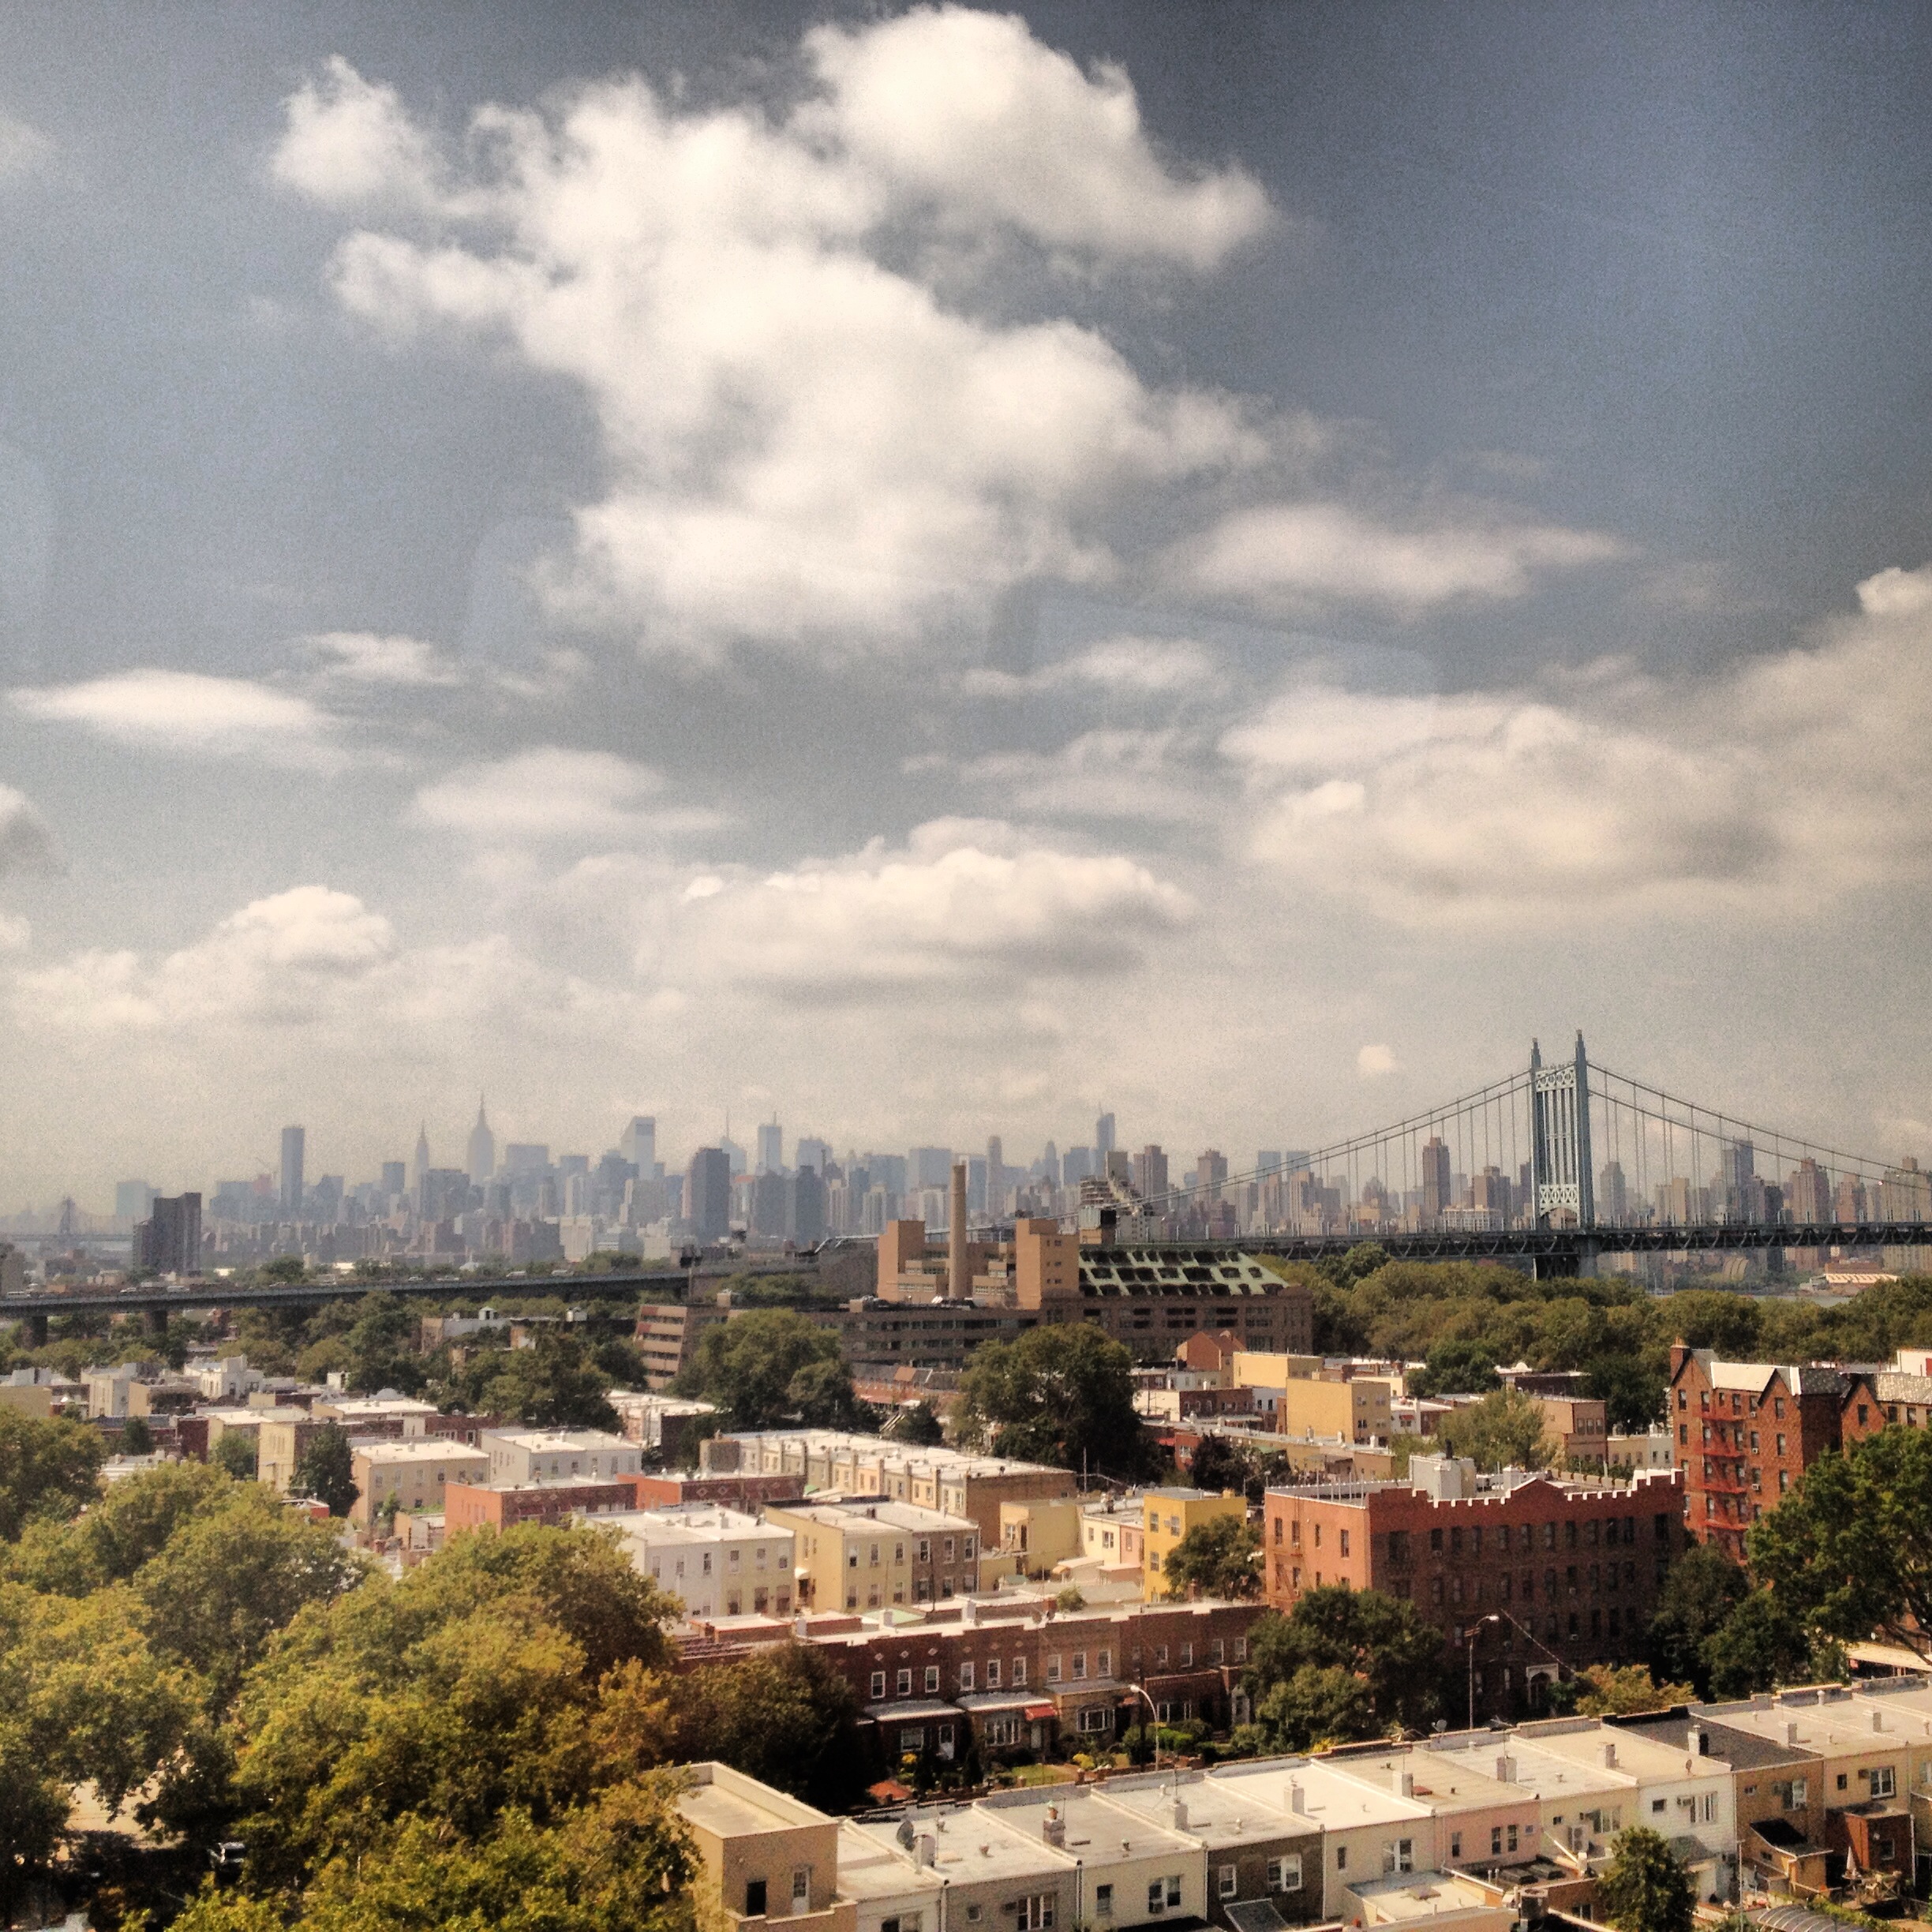 NYC skyline from the train.